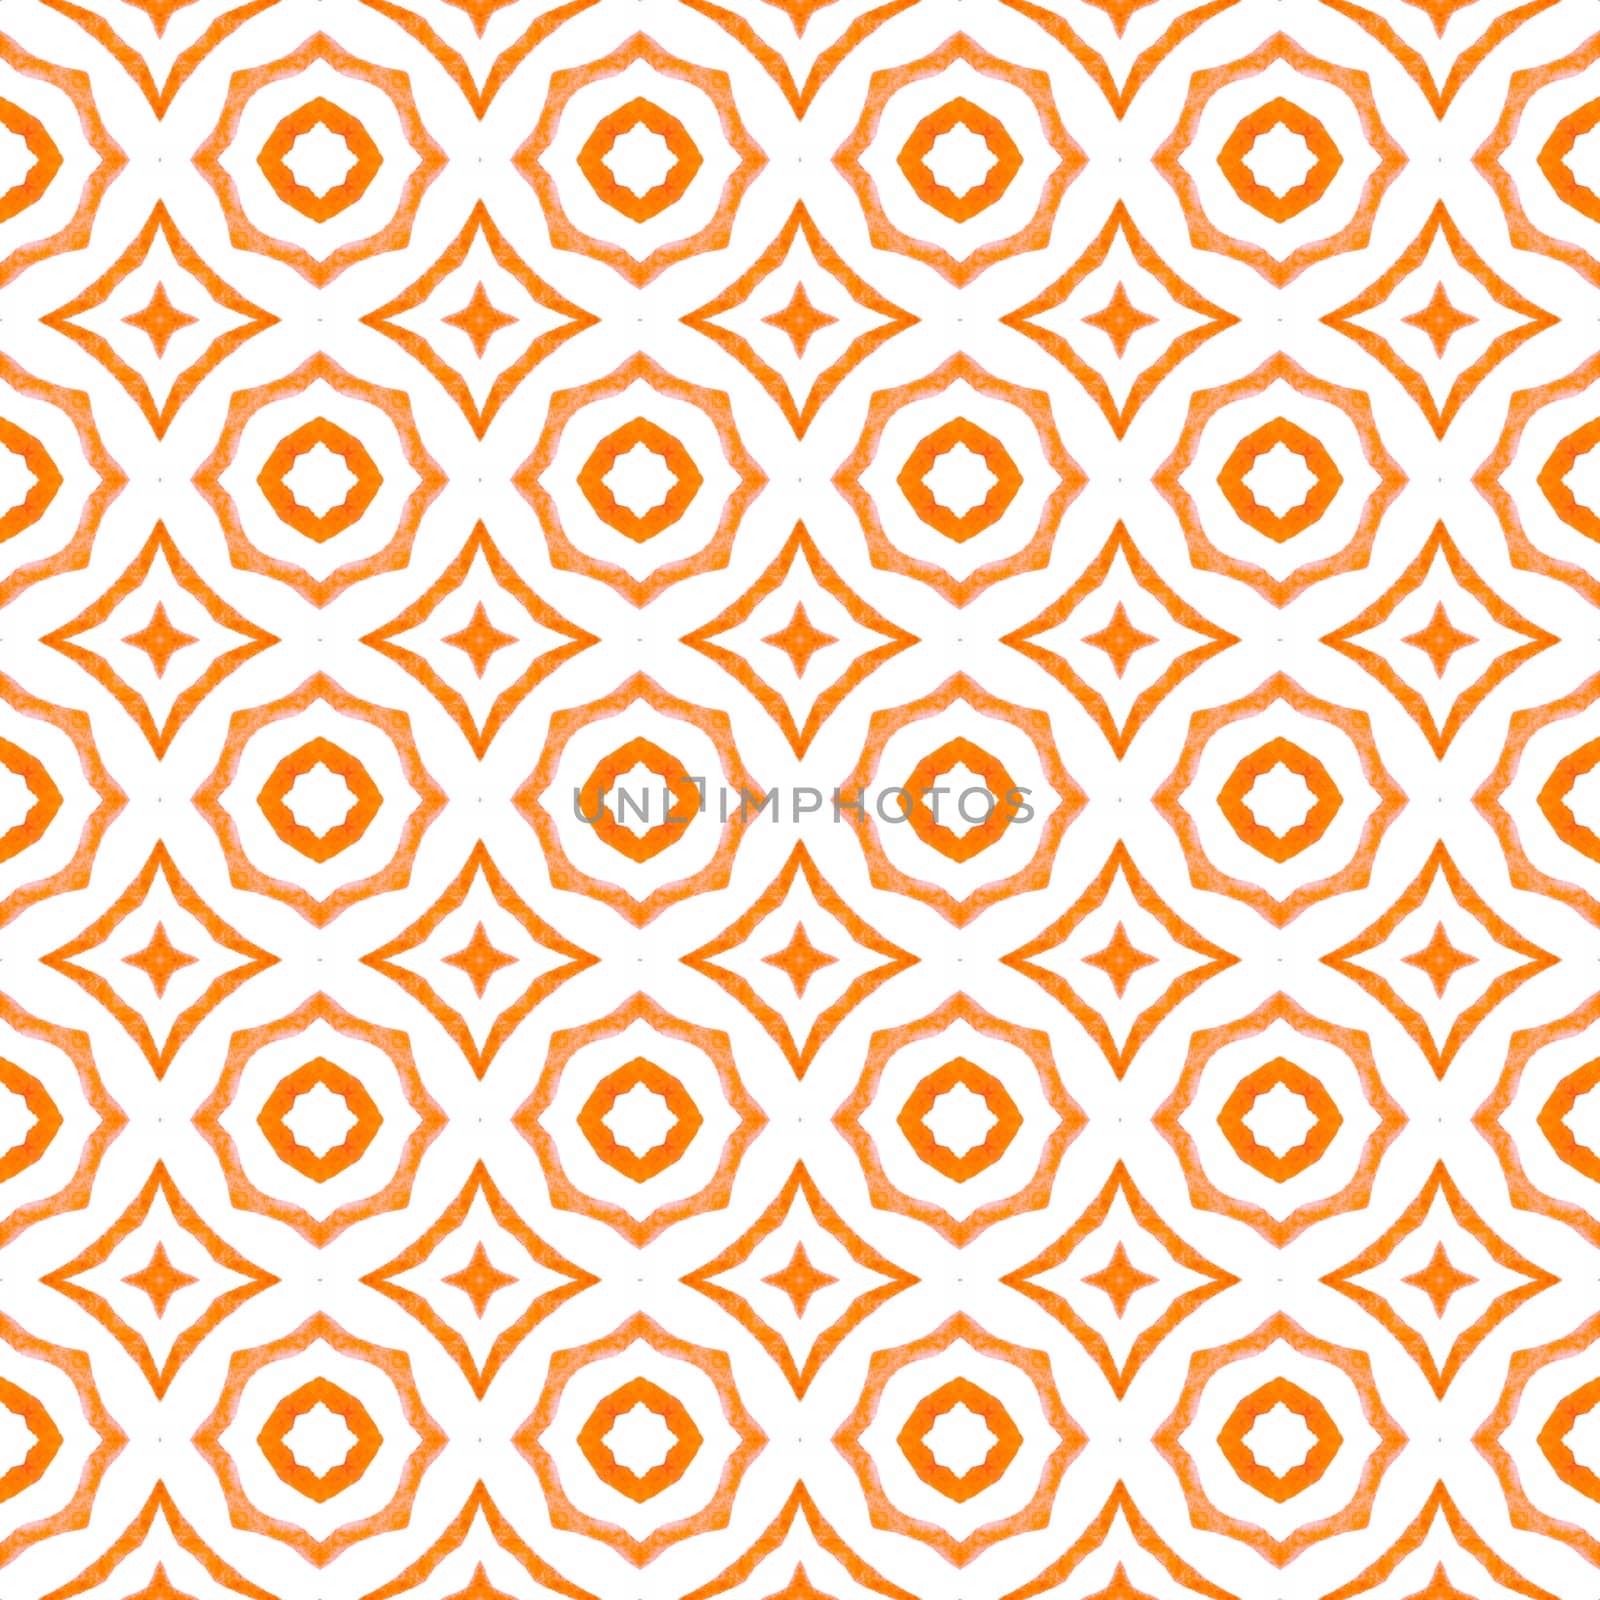 Textile ready lovely print, swimwear fabric, wallpaper, wrapping. Orange pleasant boho chic summer design. Summer exotic seamless border. Exotic seamless pattern.